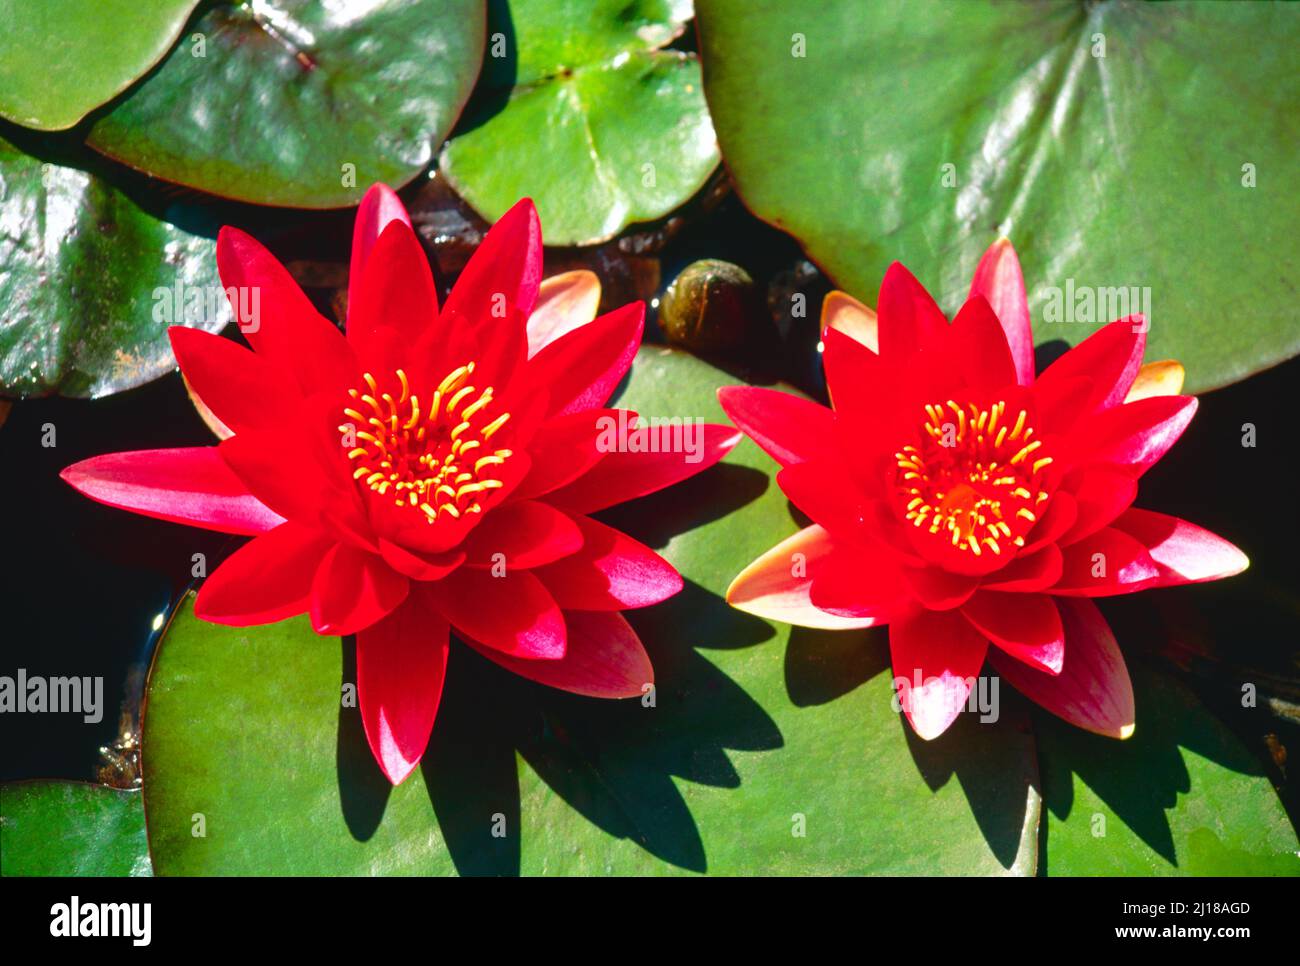 Red water lilies, Stock Photo